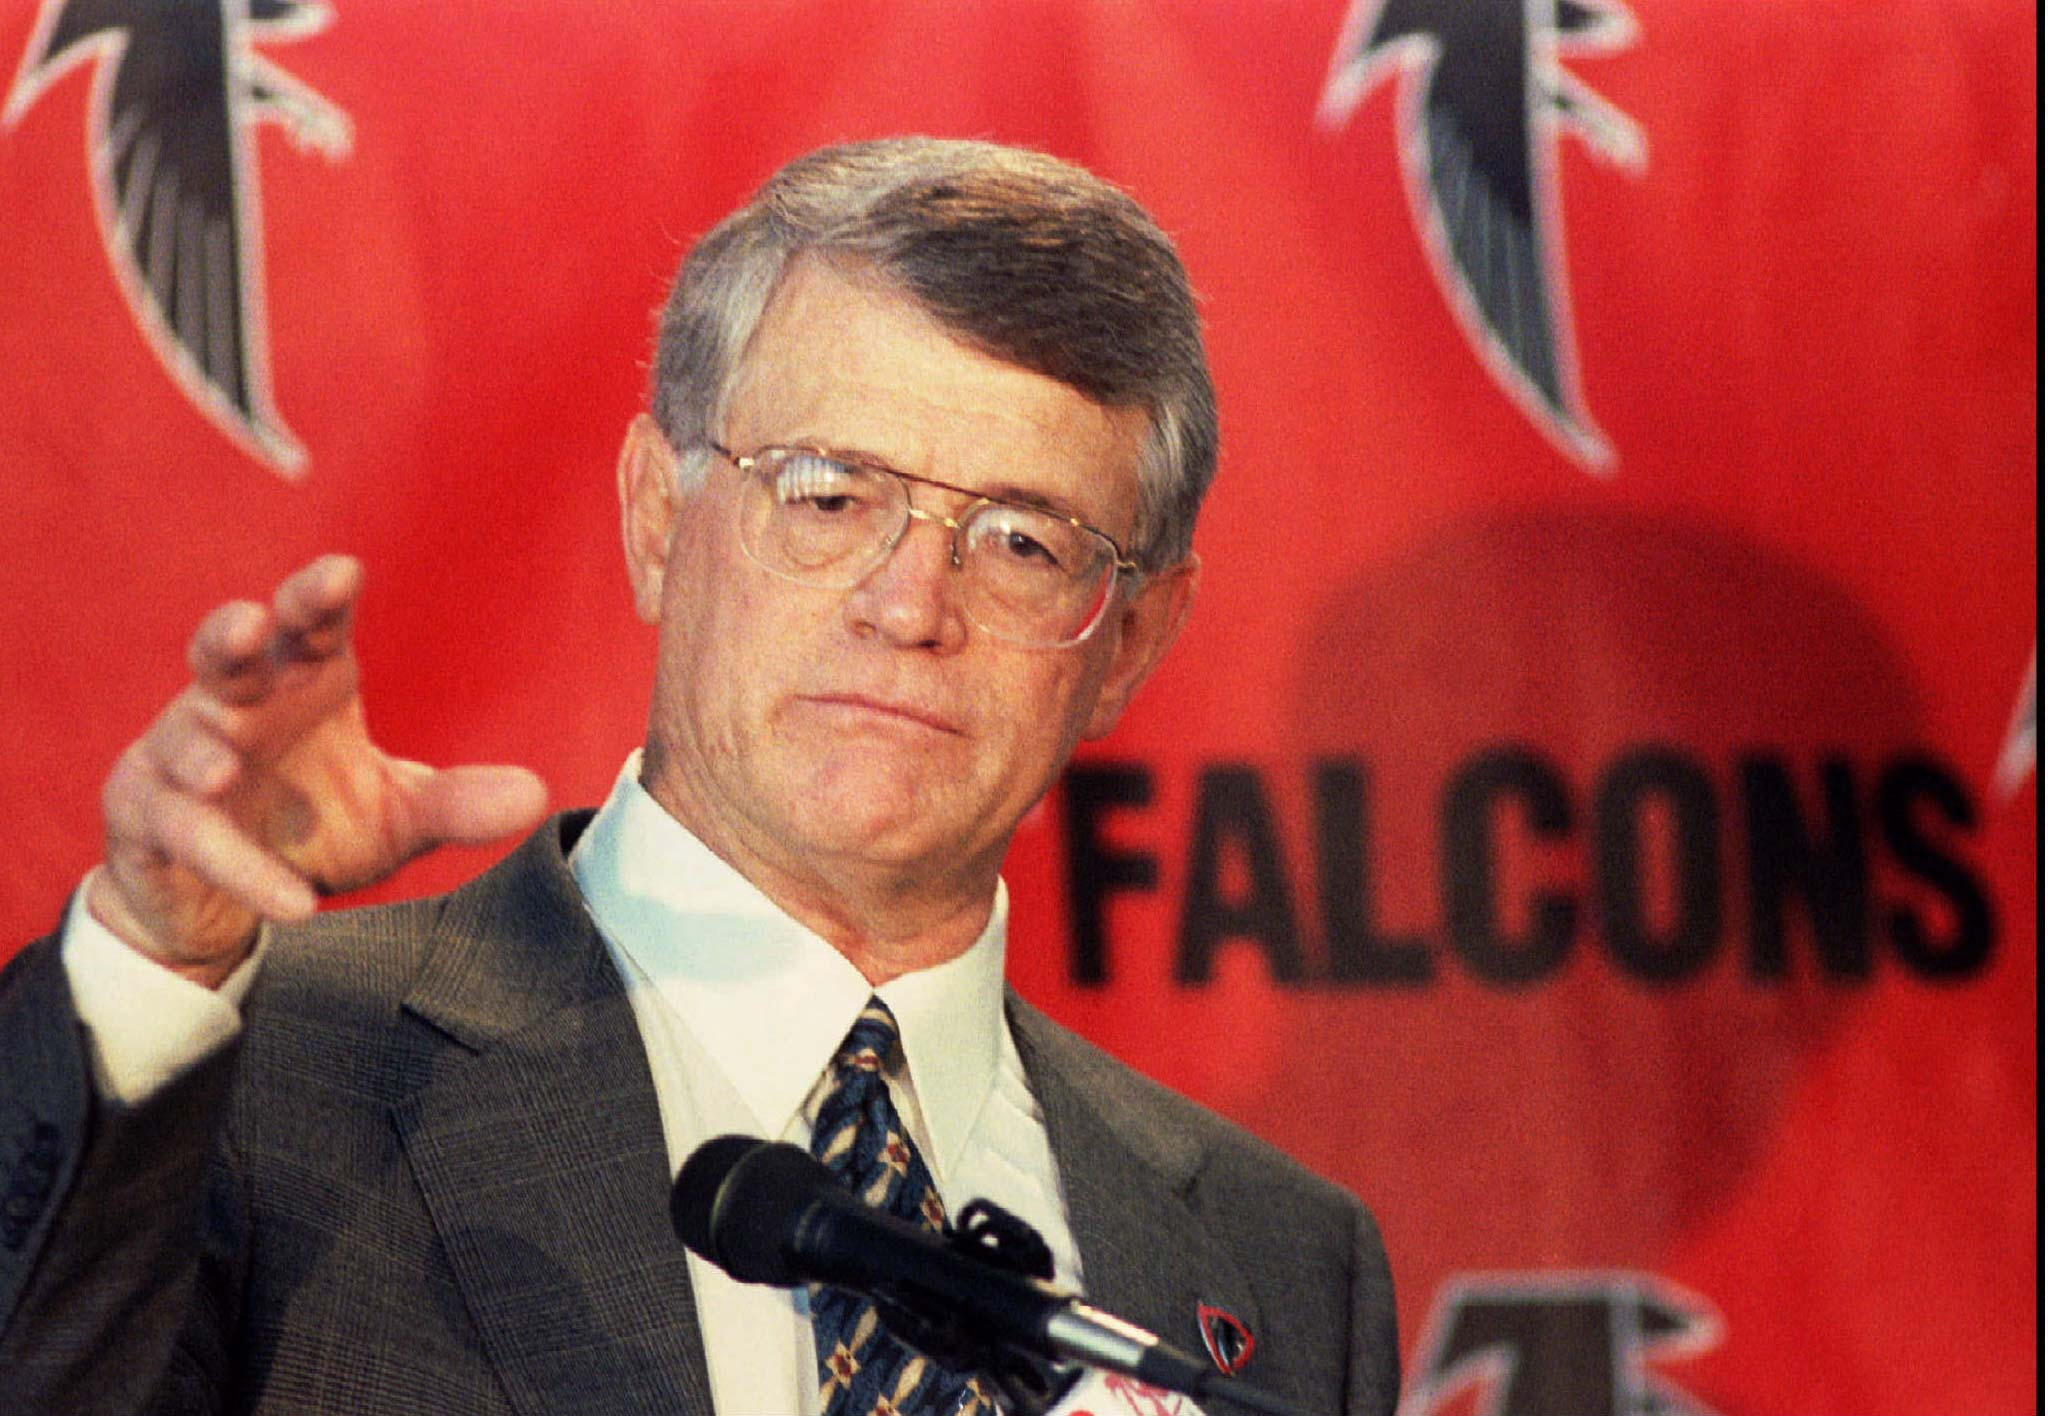 Dan Reeves, former NFL head coach and player, dead at 77 | Reuters